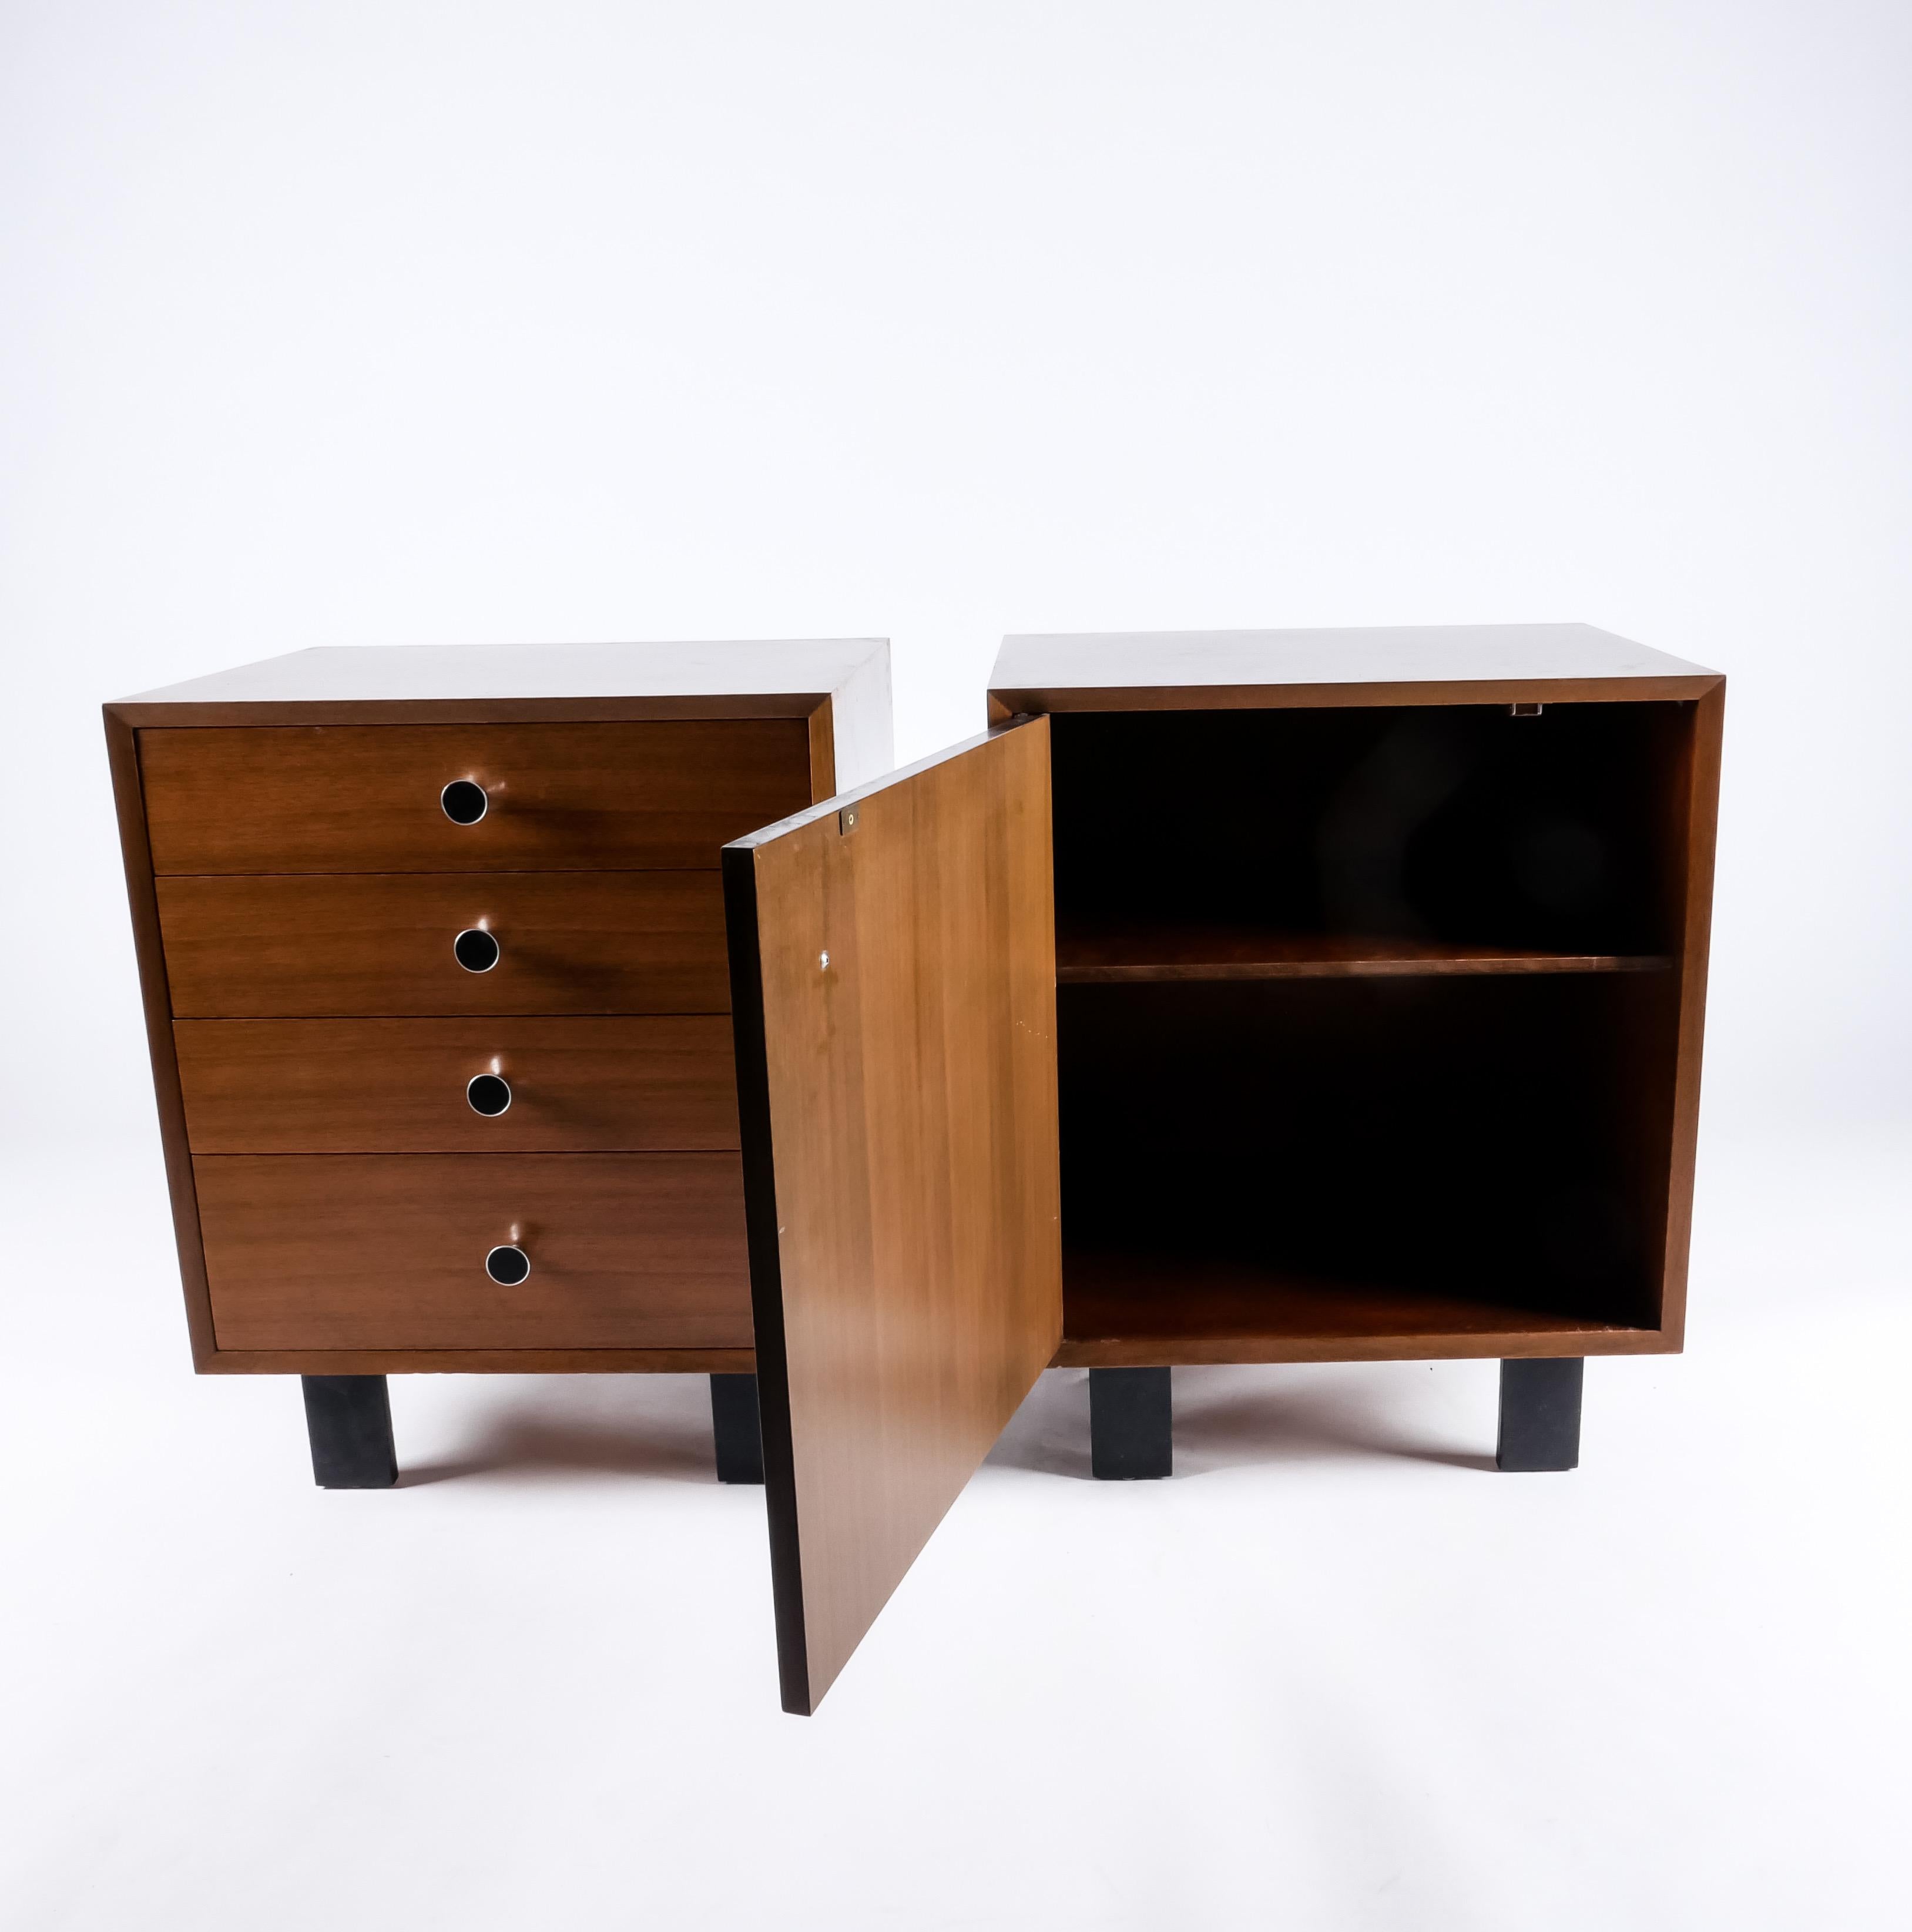 A fantastic pair of cabinets by George Nelson from his “Basic Cabinet Series” 1946. These retain their original finish in excellent condition, and have the less common round enameled pulls. One has four drawers while the other a single cabinet door